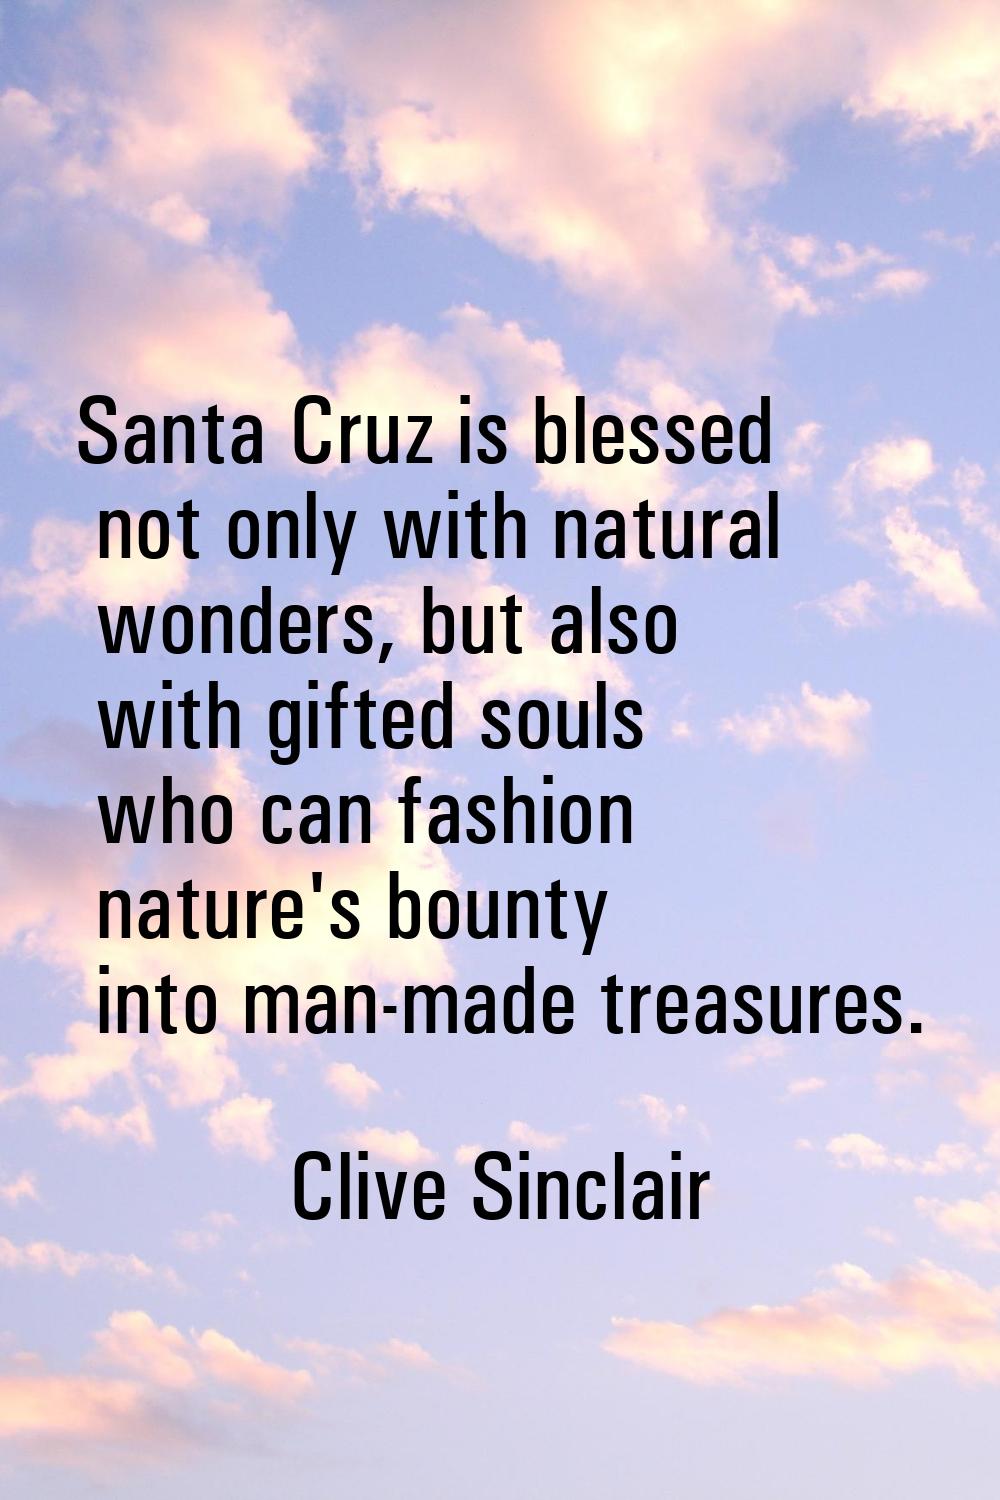 Santa Cruz is blessed not only with natural wonders, but also with gifted souls who can fashion nat